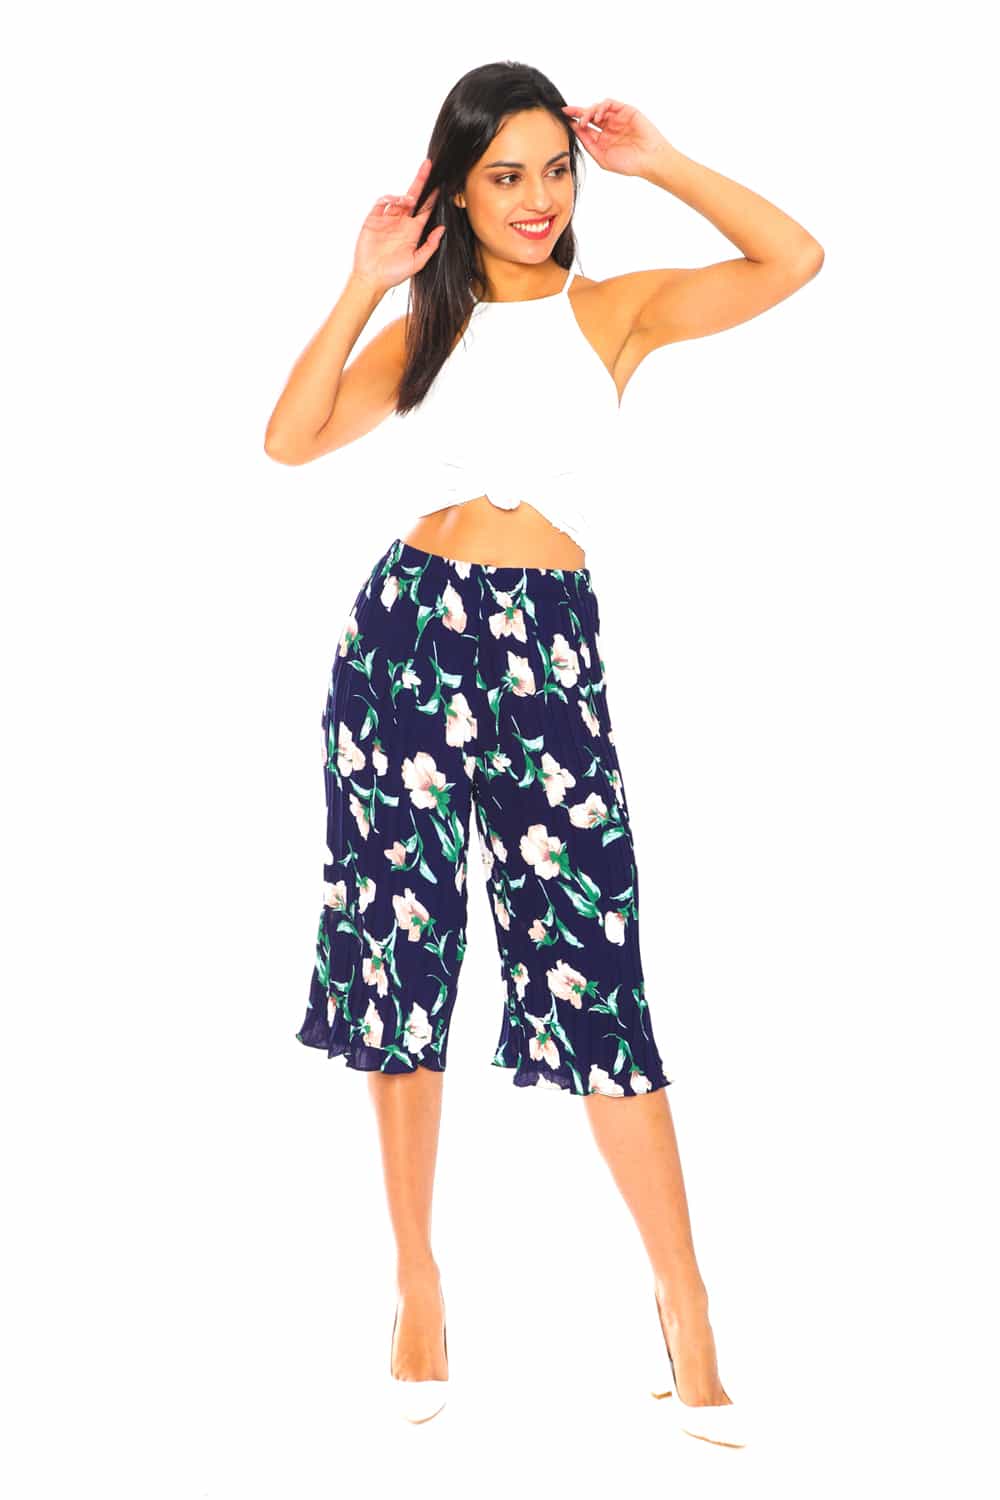 Floral Print Pants with Green Leaves - 2